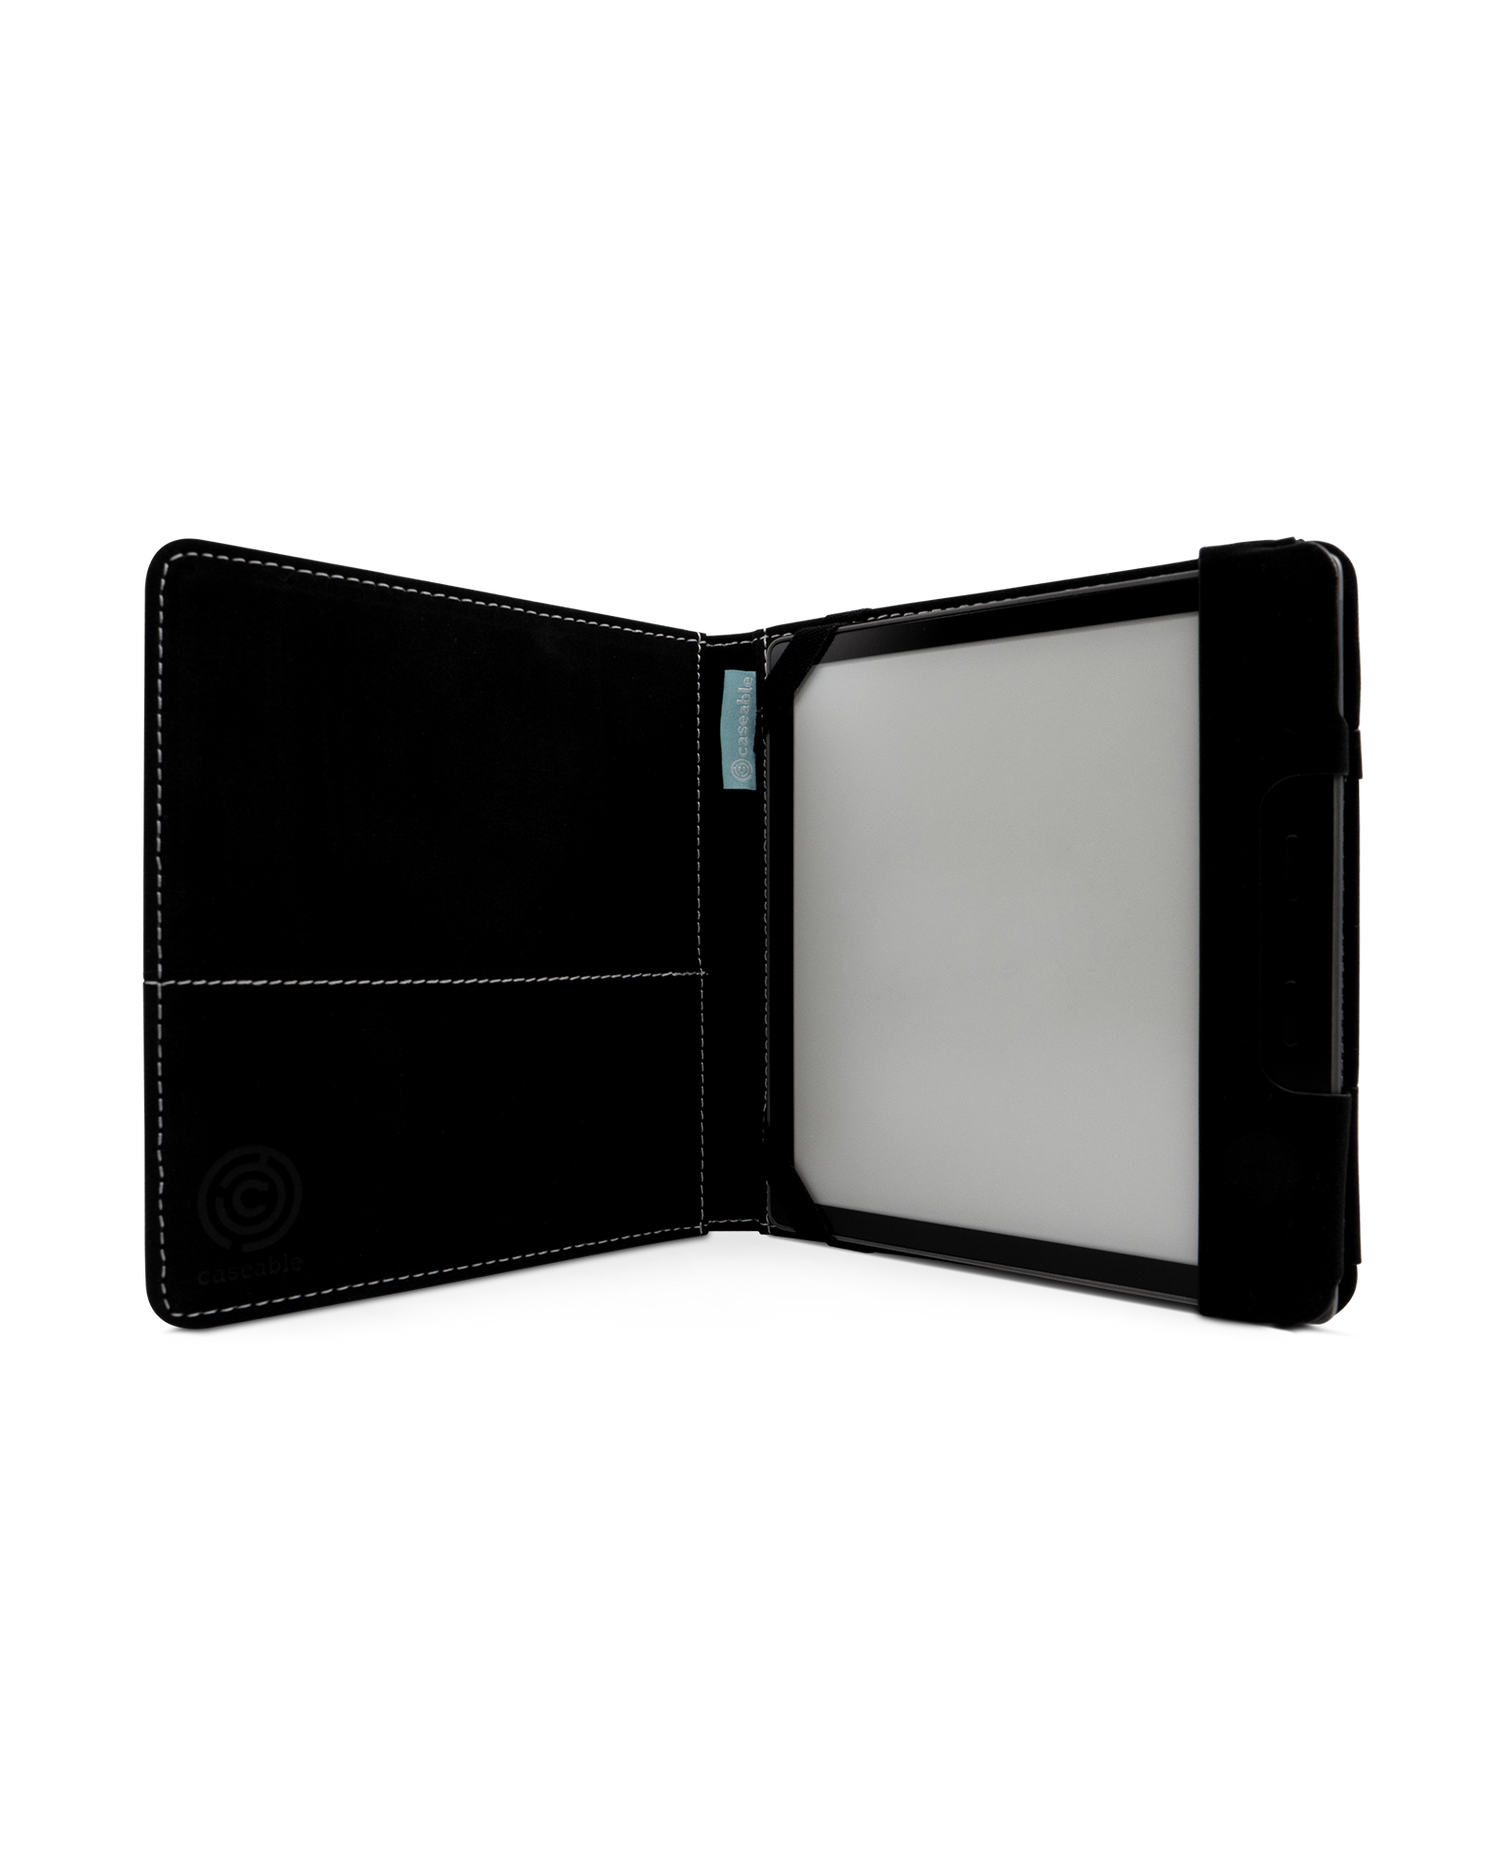 London eReader Case for tolino vision 6: Opened interior view